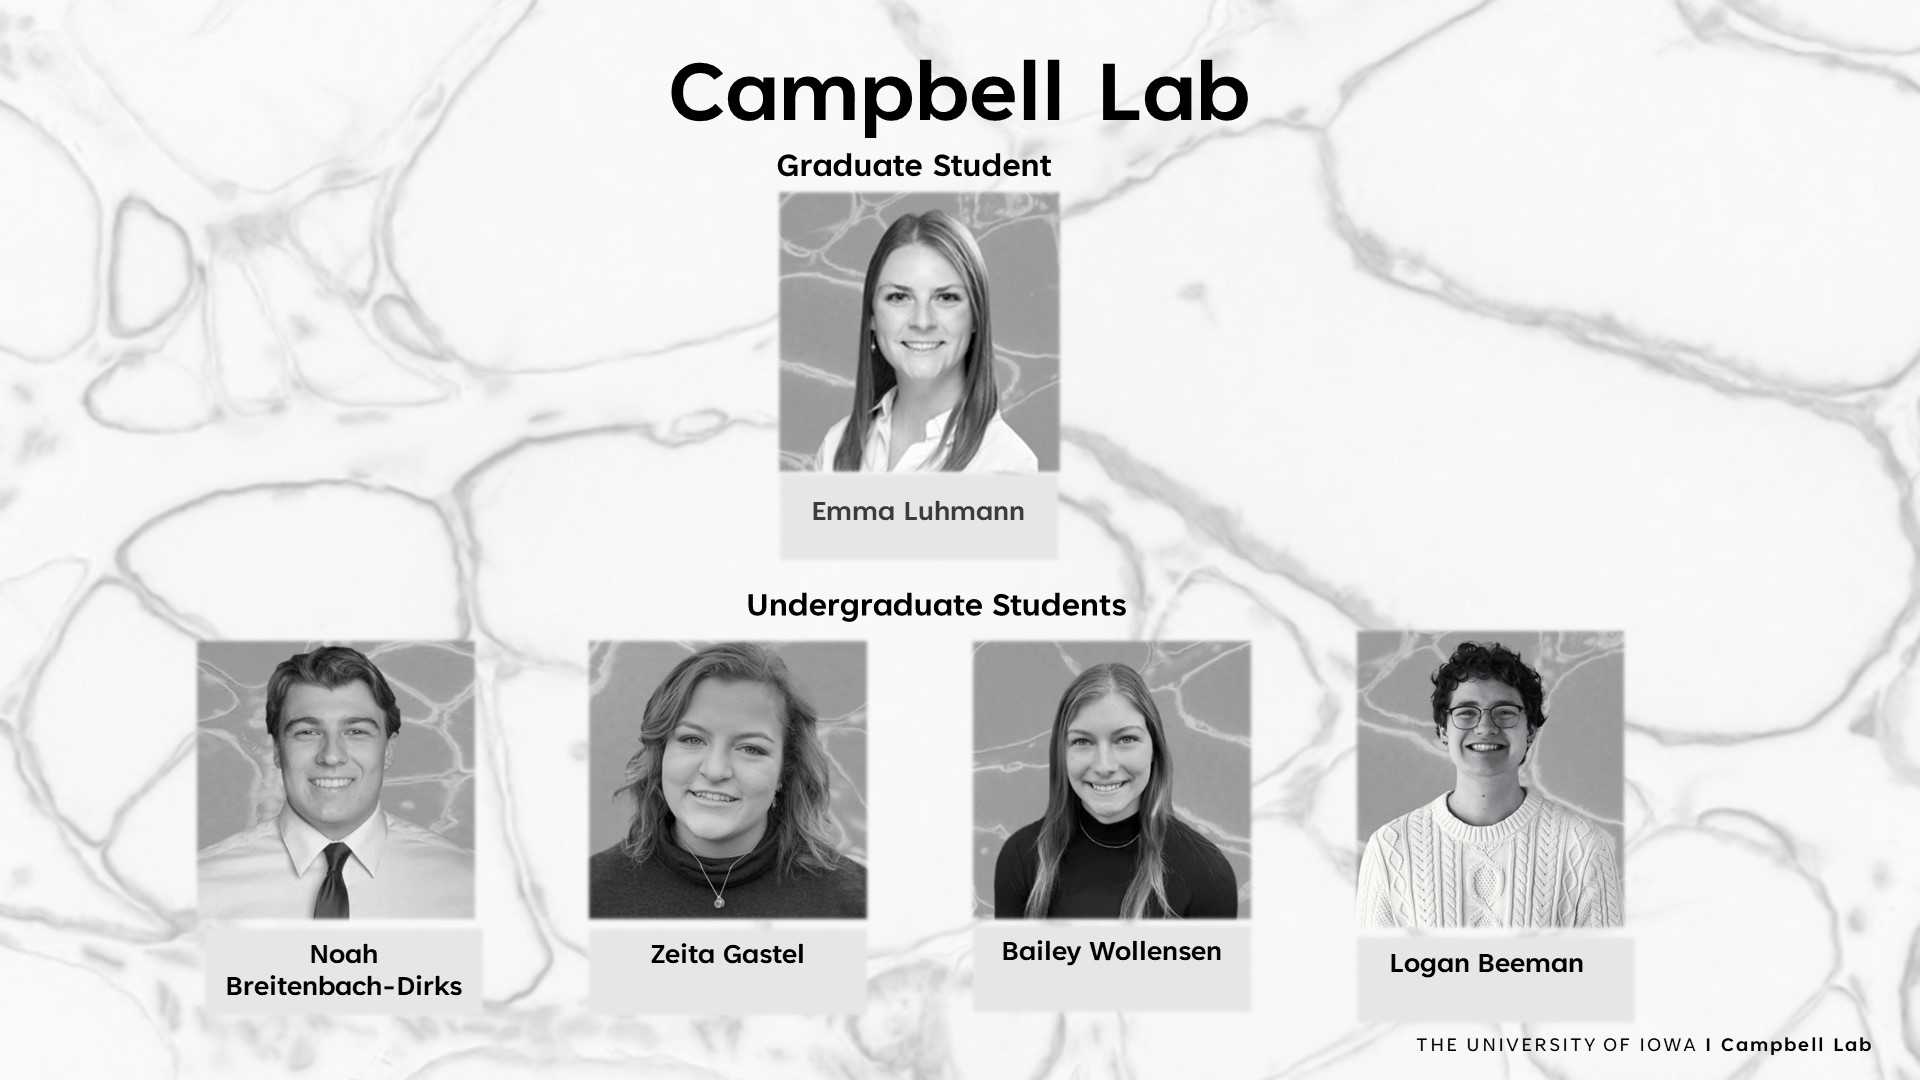 Photos of Campbell Lab grad and undergrad students